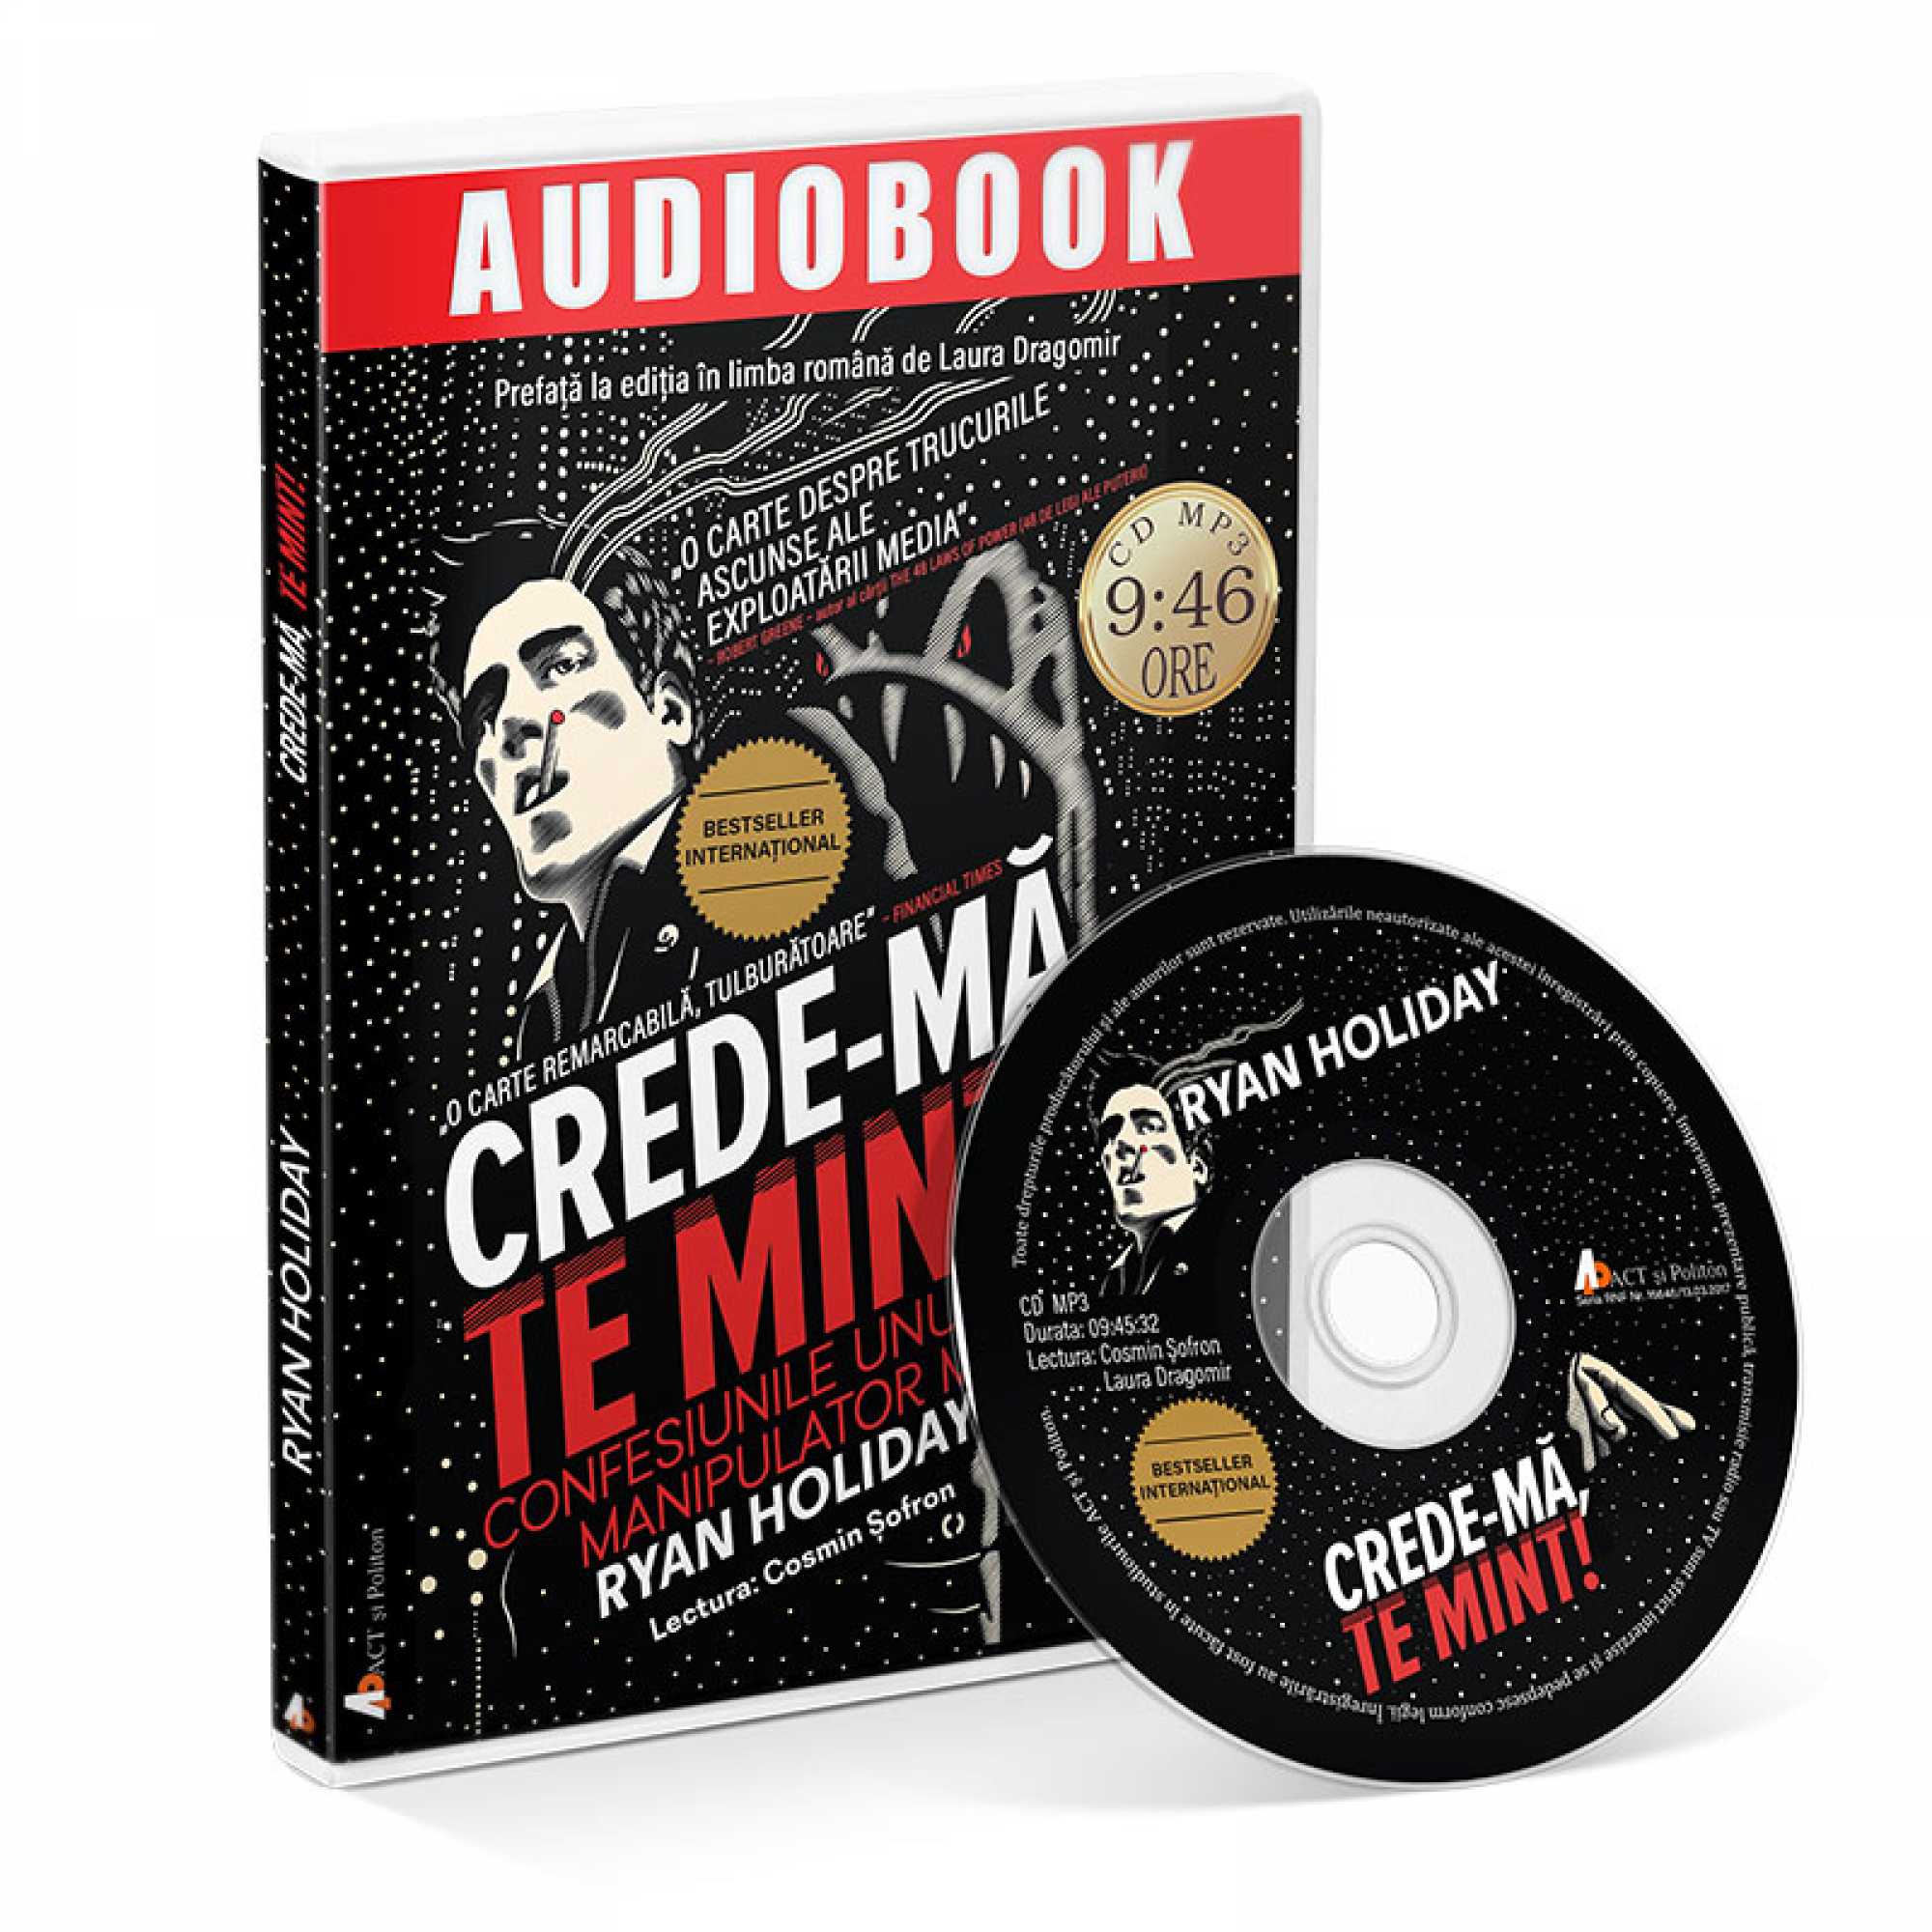 Crede-ma, te mint! | Ryan Holiday carturesti.ro poza bestsellers.ro